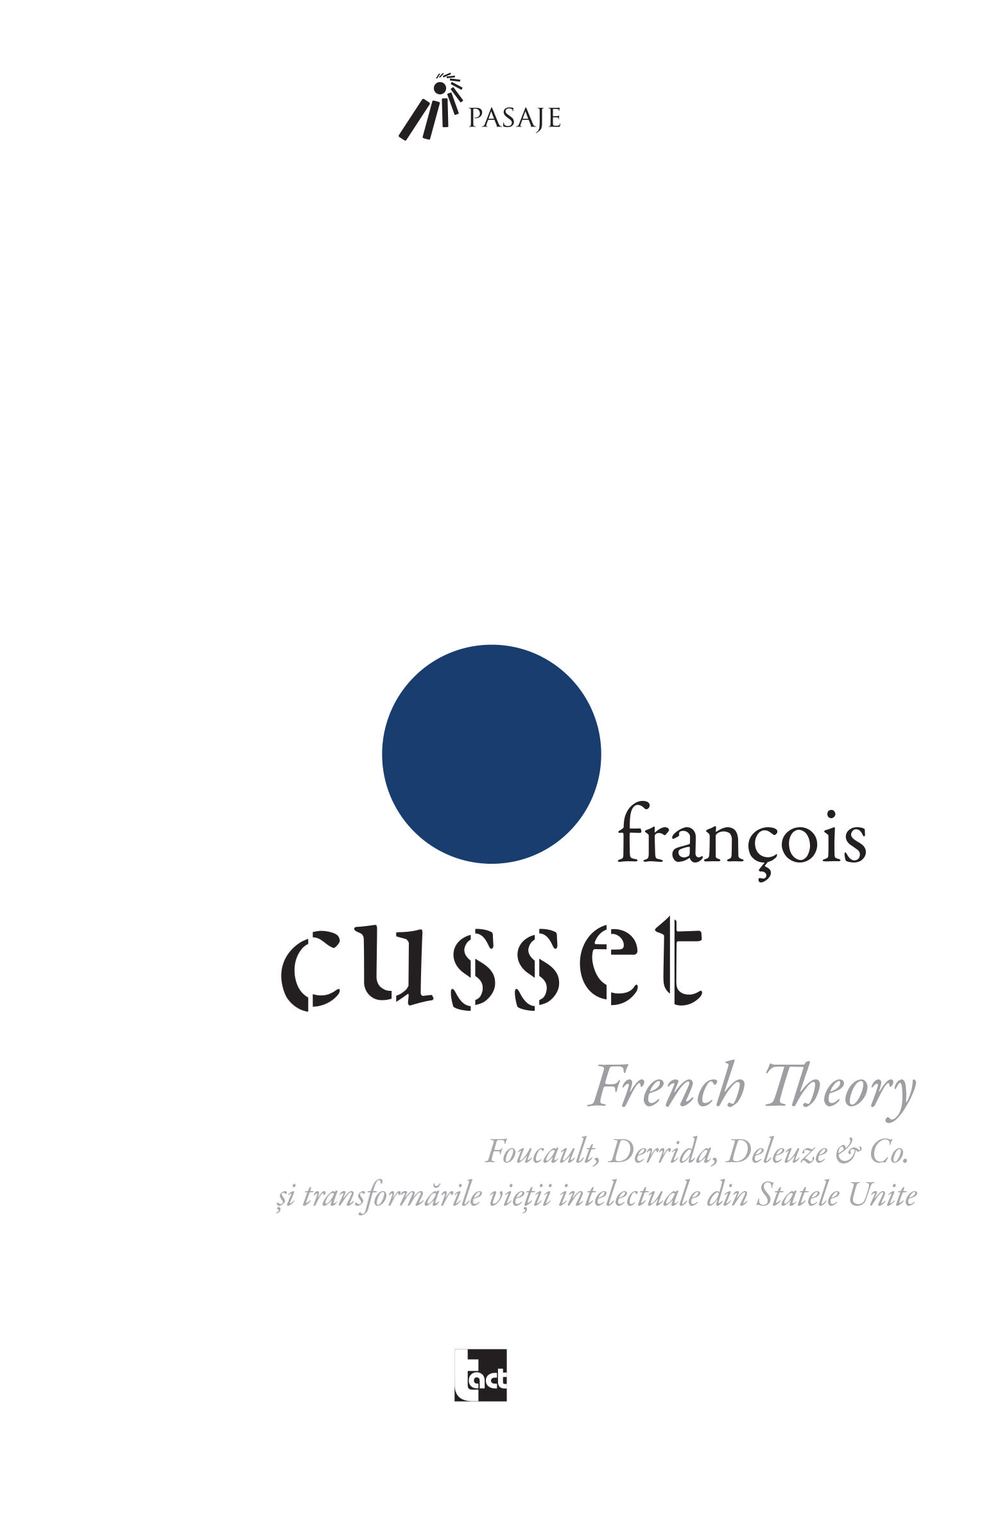 French theory | Francois Cusset carturesti.ro poza bestsellers.ro